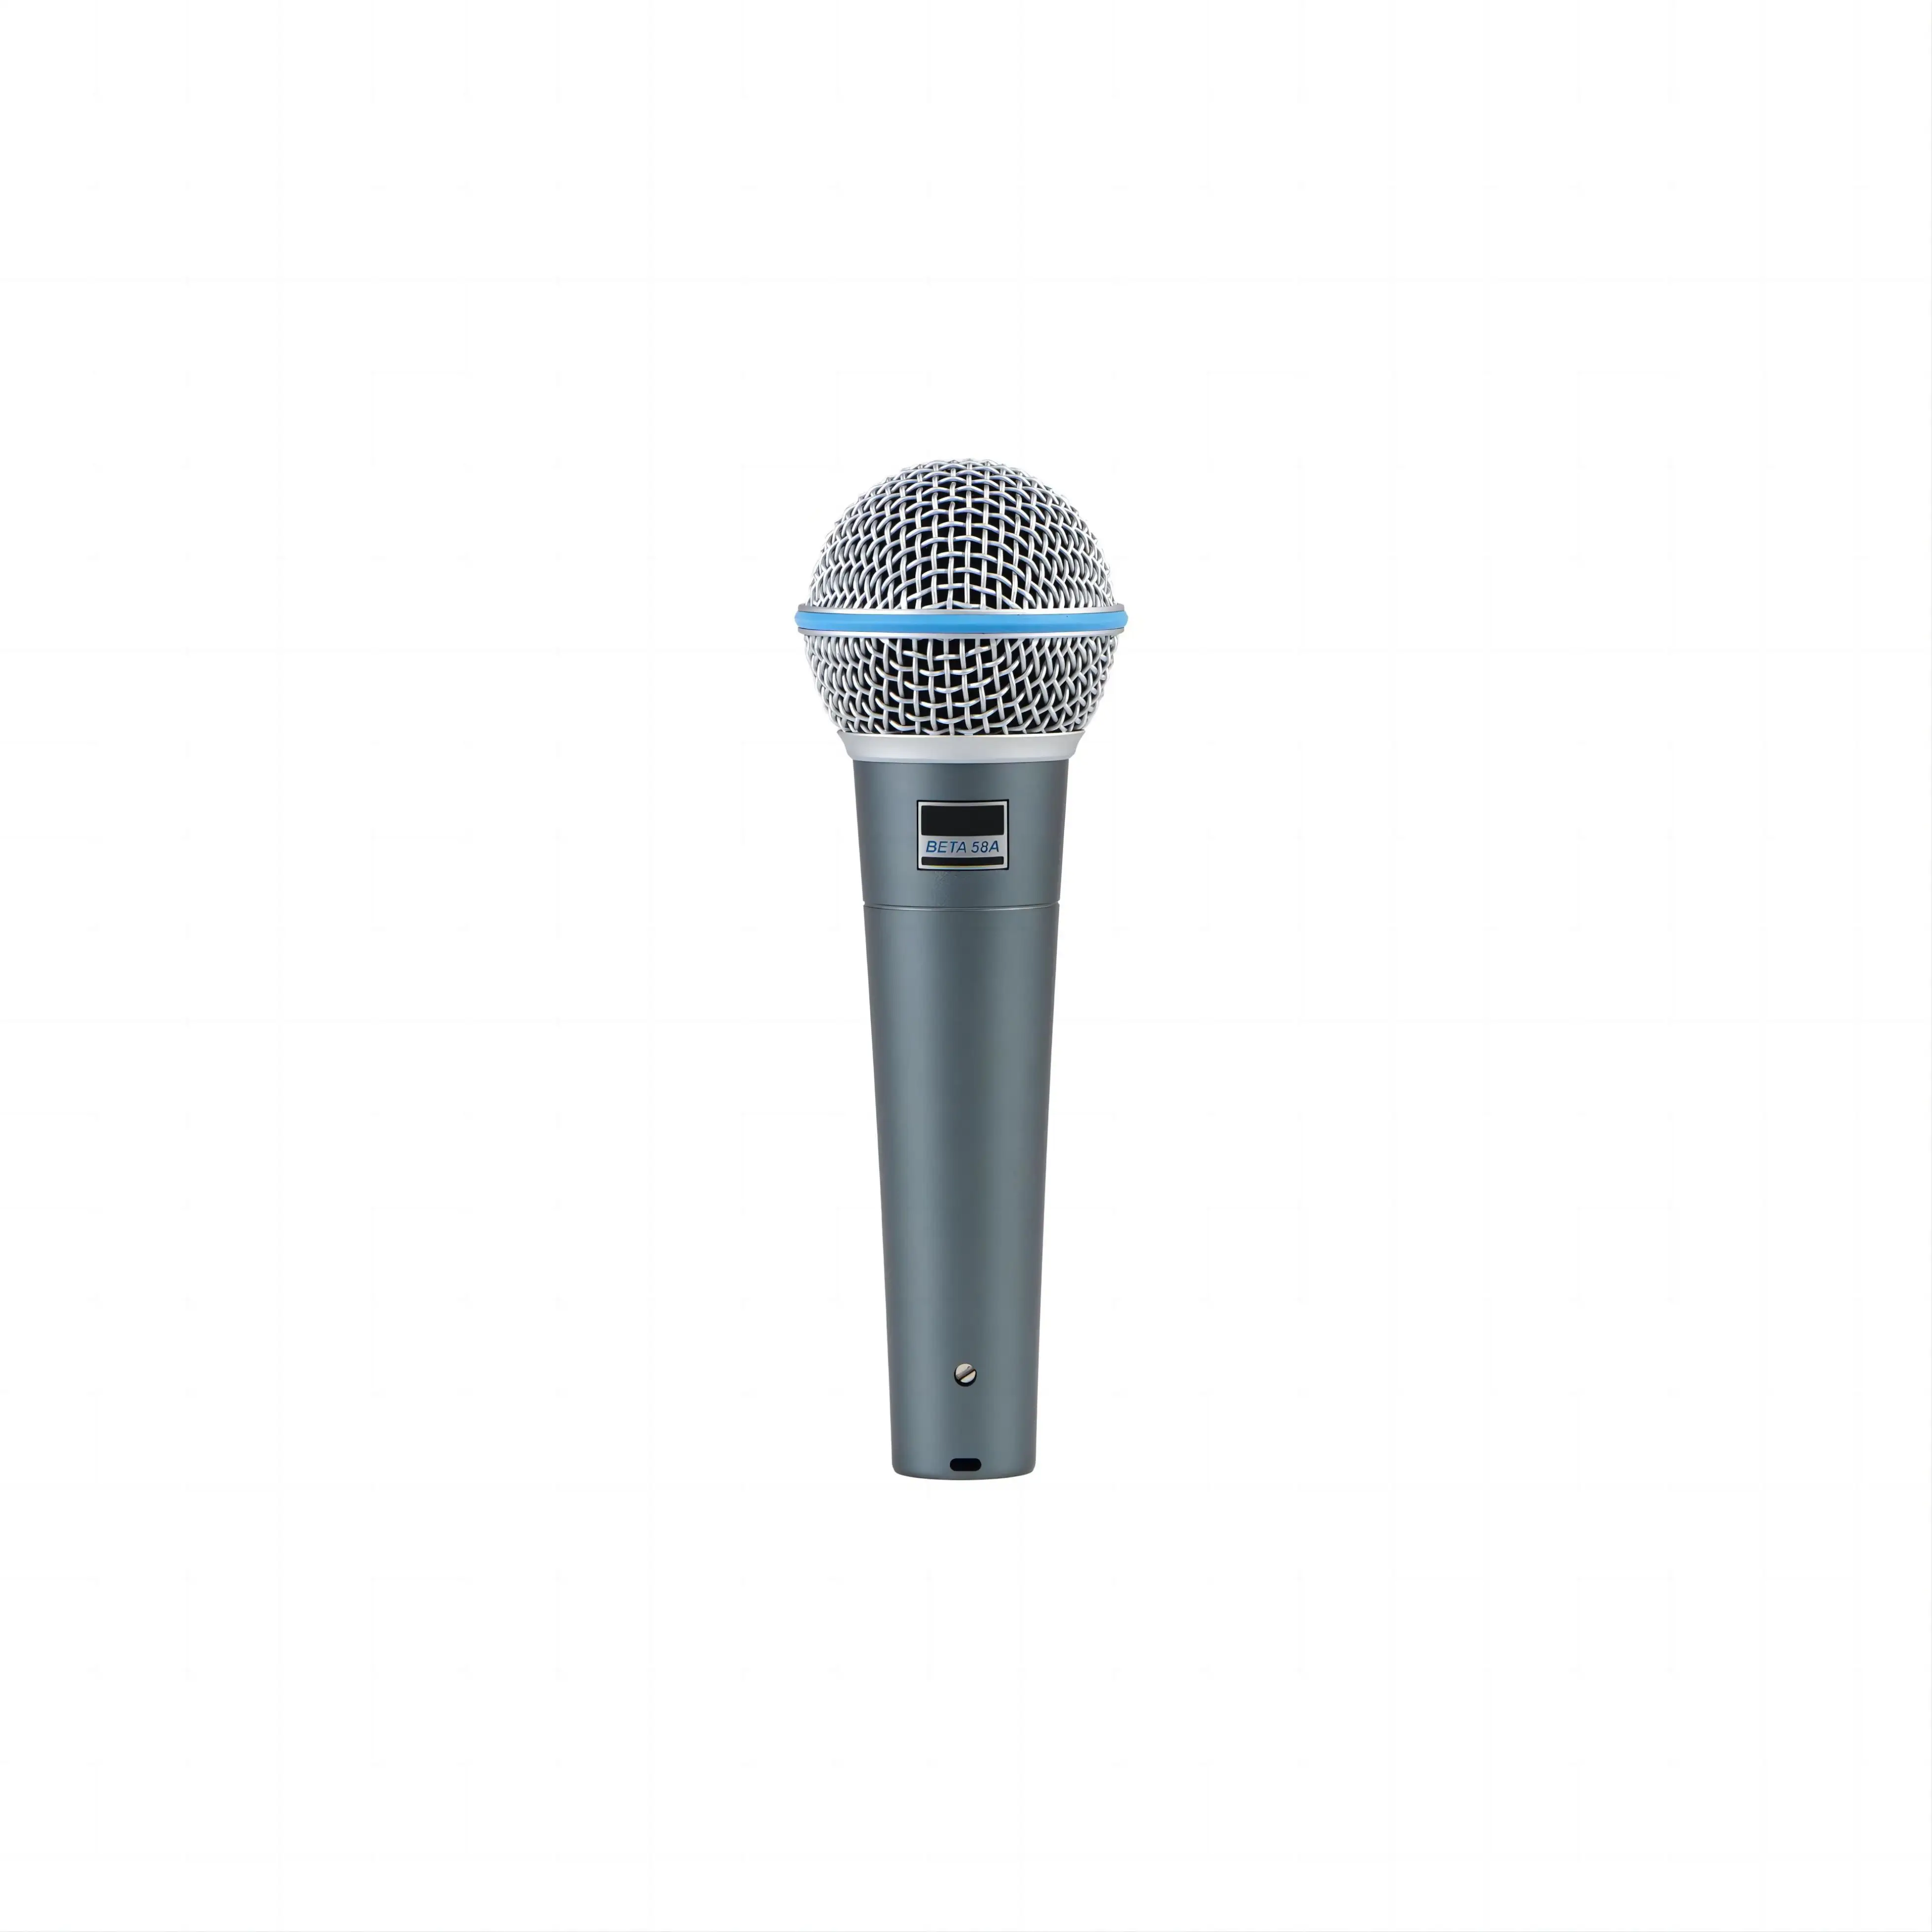 New Design Usb Wireless Microphone Remote Teaching Handheld L With Great Price